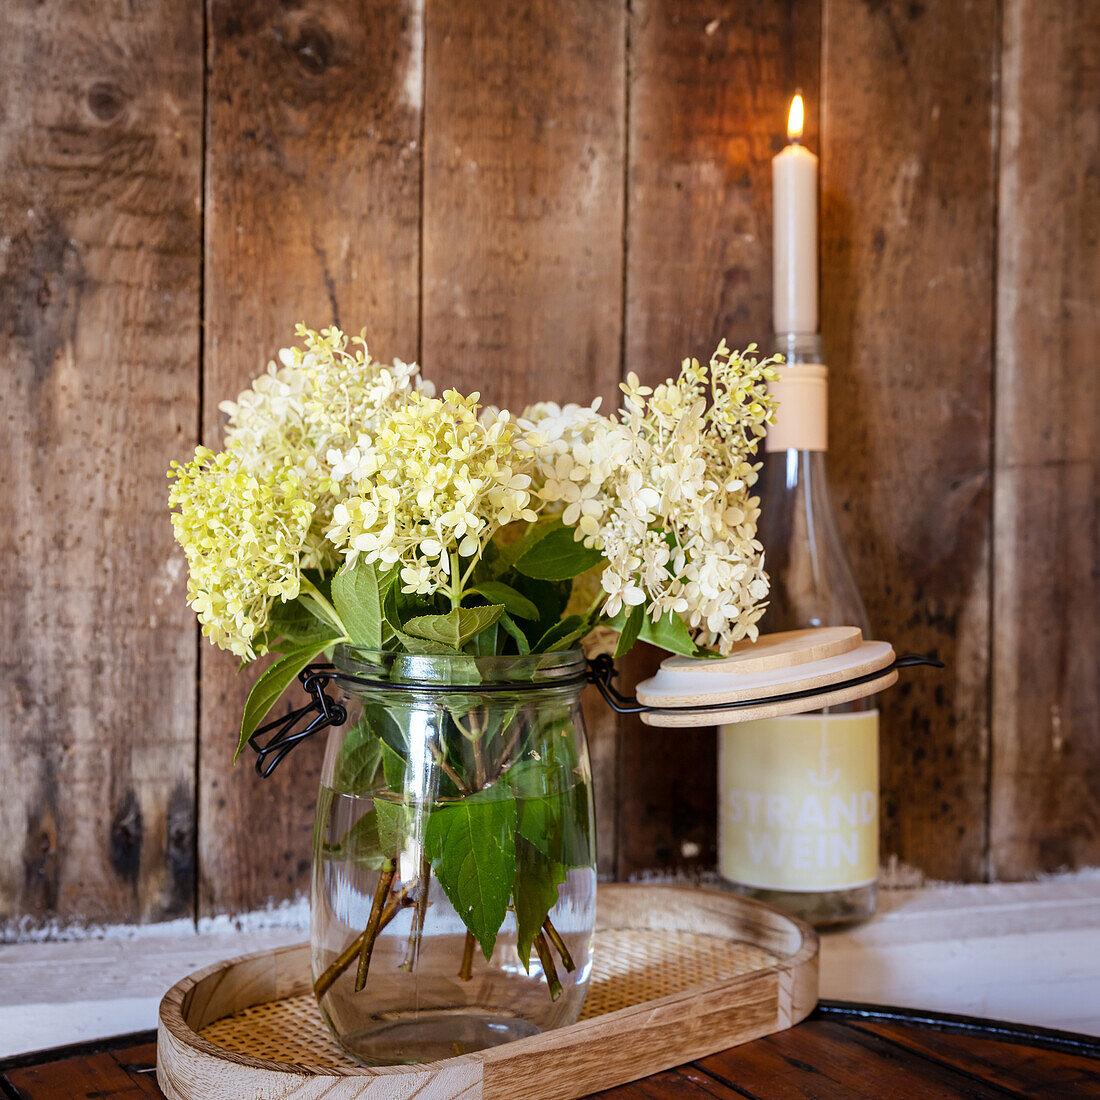 White hydrangeas in a vase and a candle in a wine bottle in the background